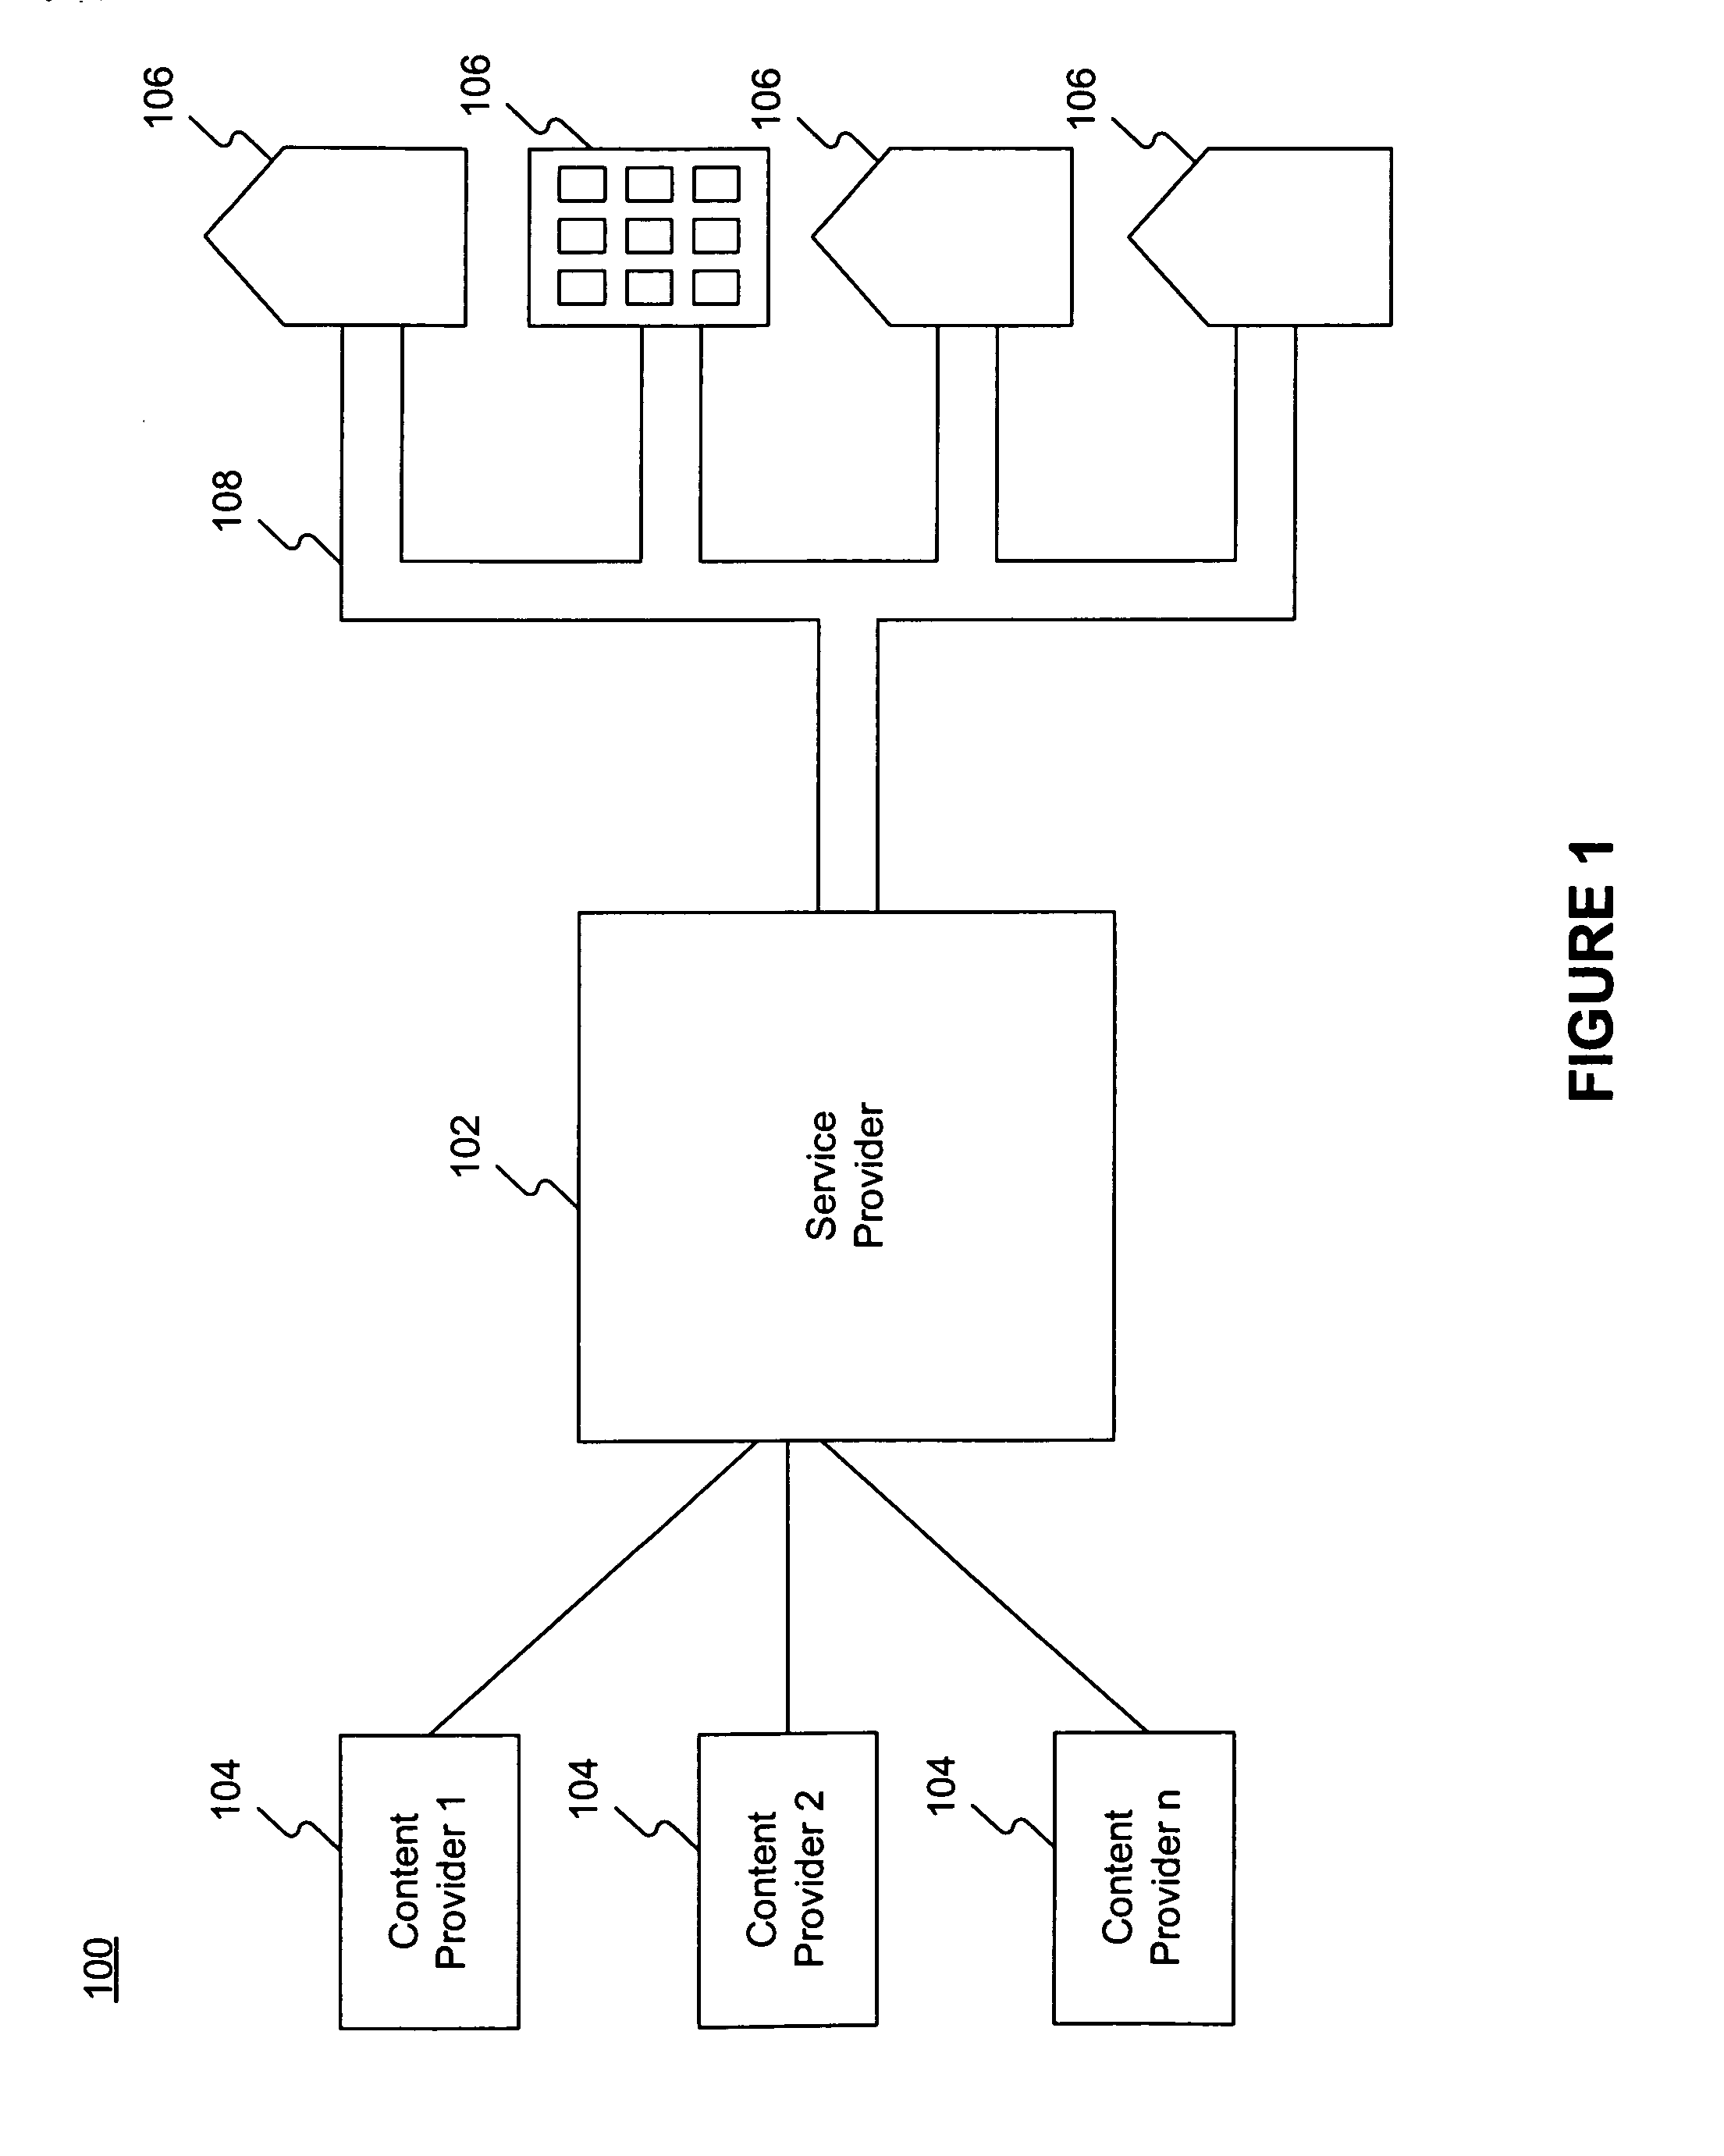 Systems and methods for providing a personal channel via television